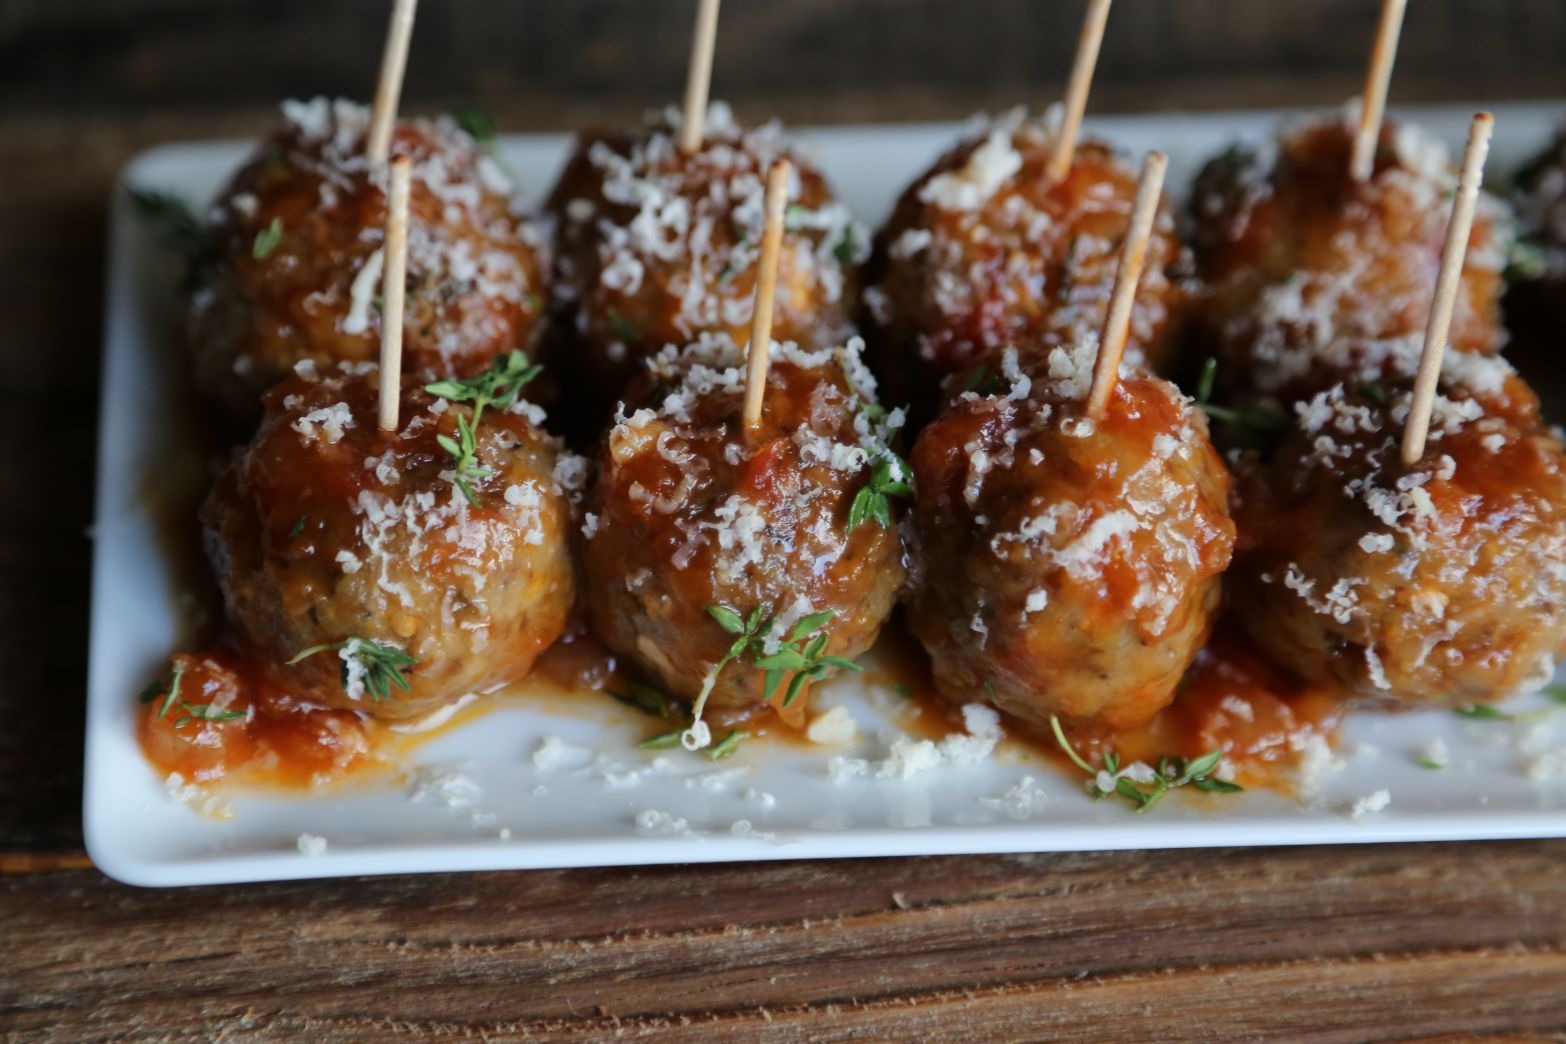 Sweet and sour mock meatballs